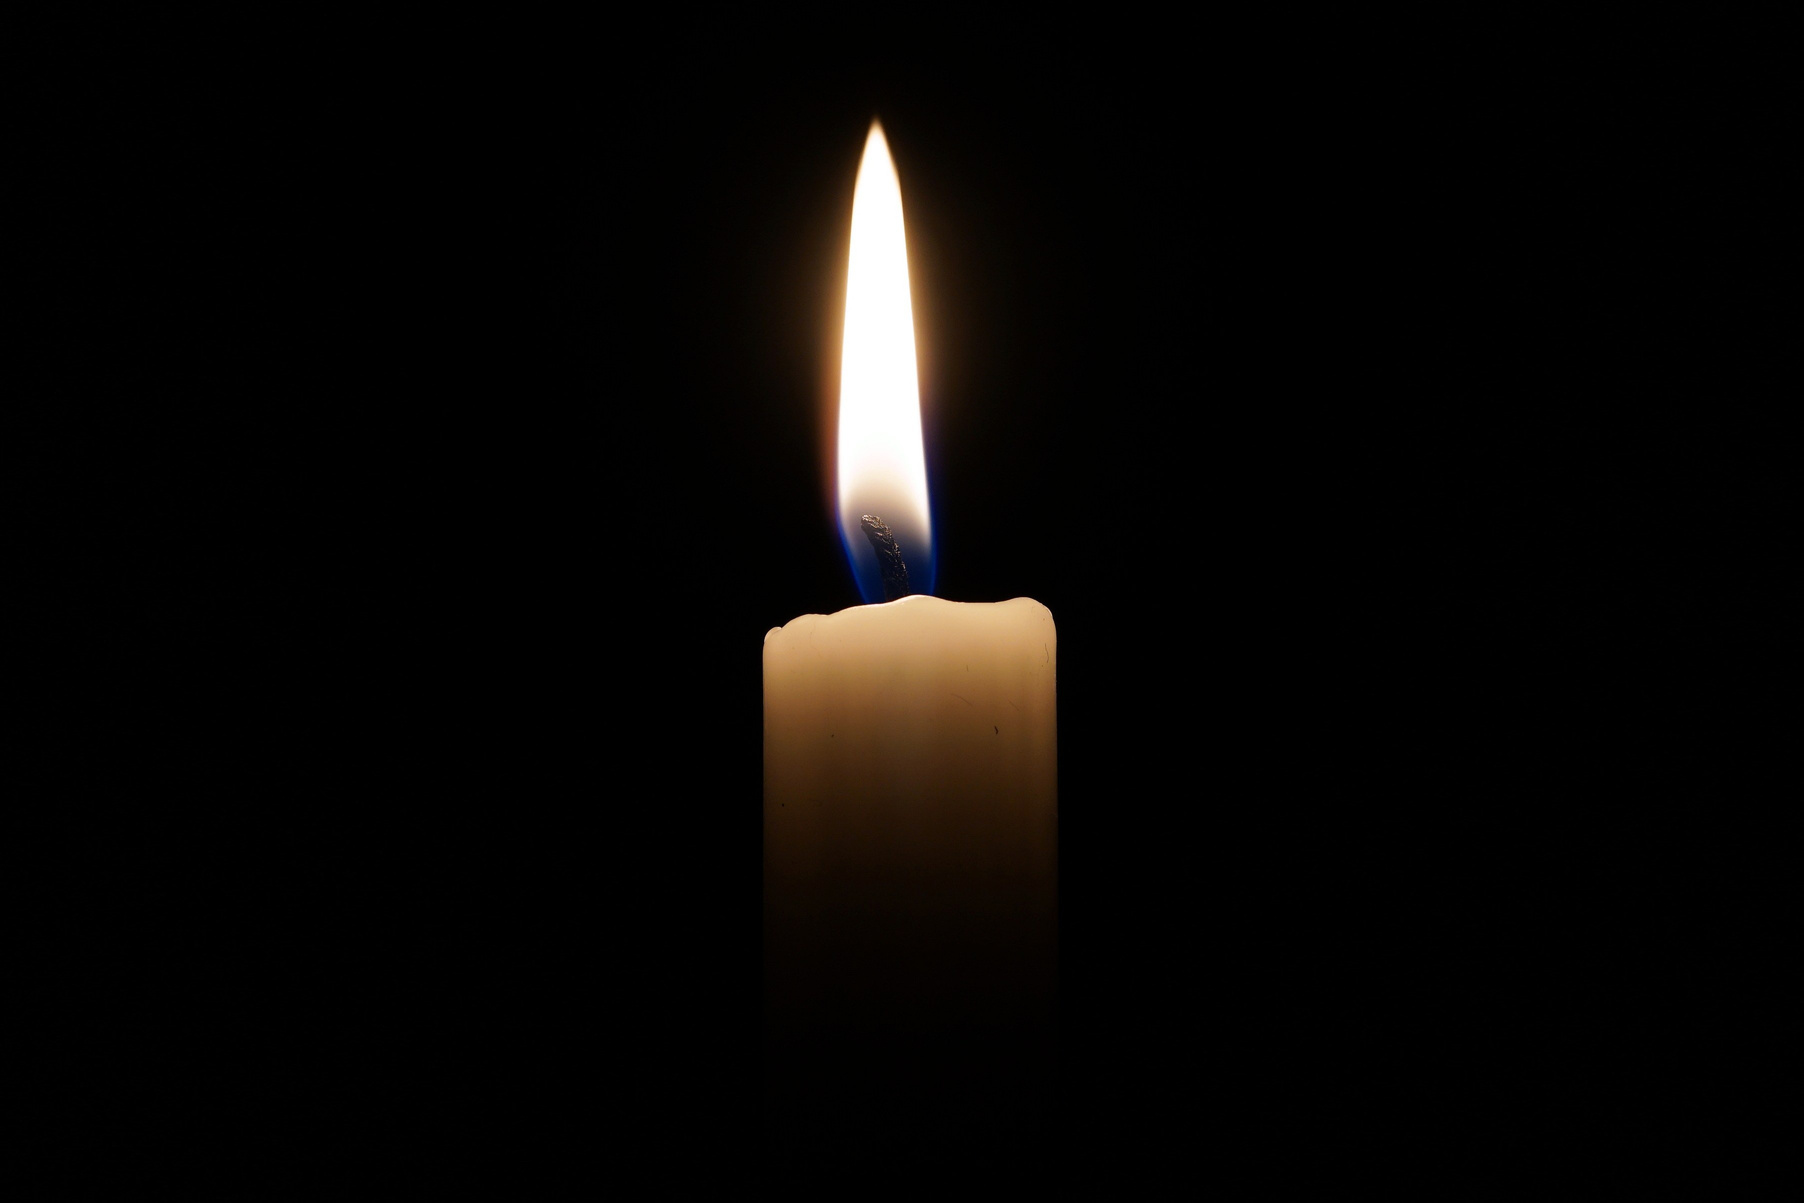 Lit Candle on a Black Background